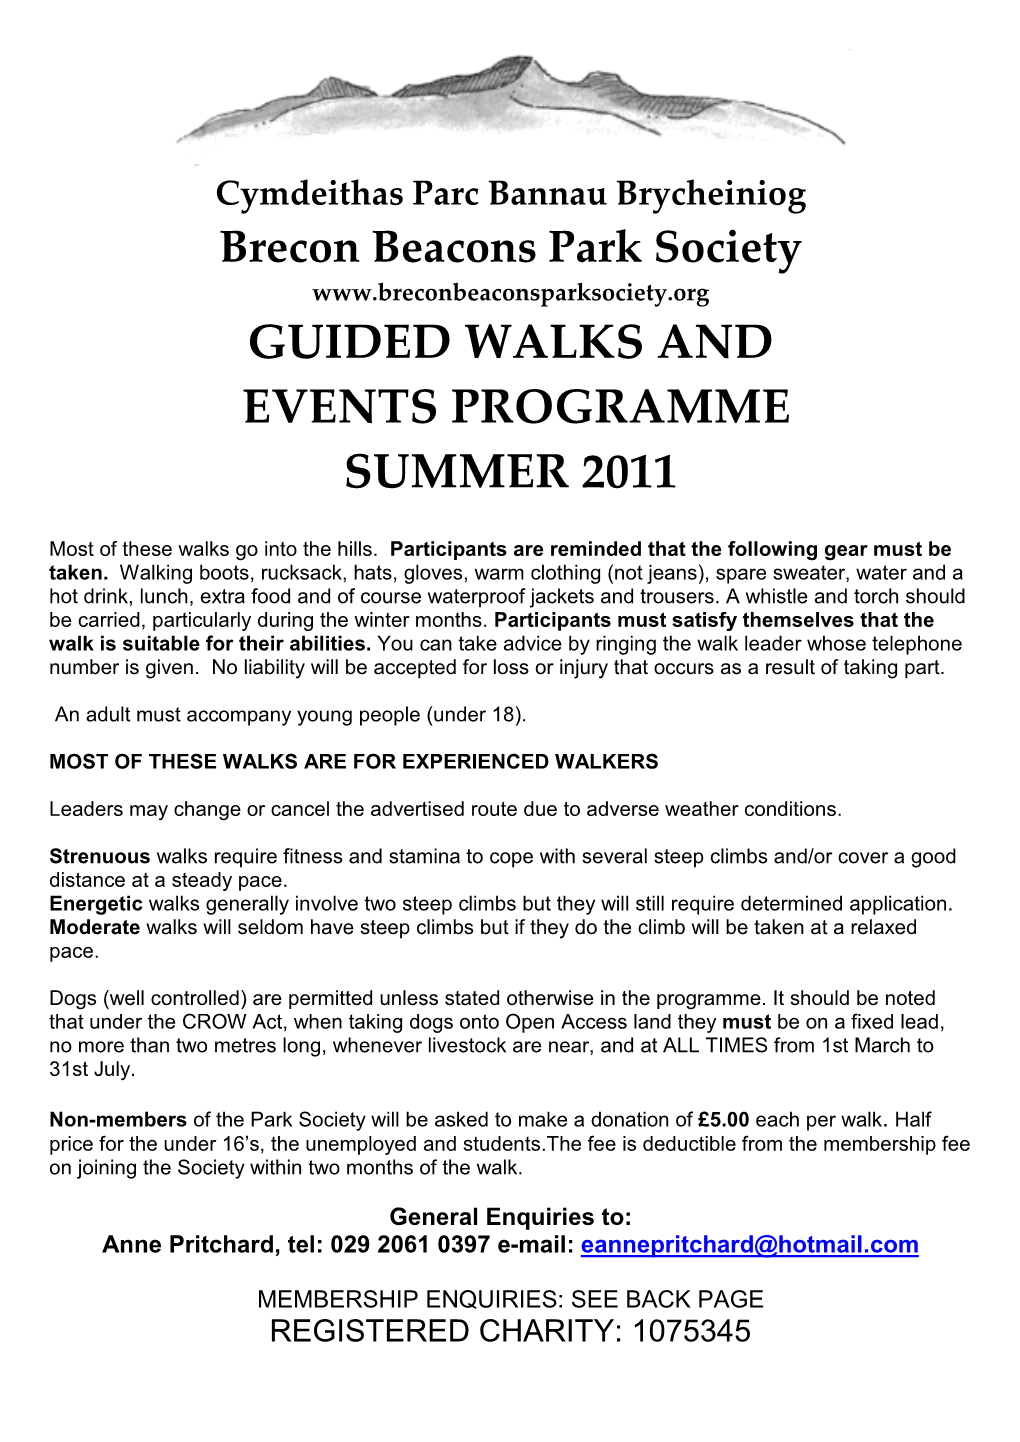 Guided Walks and Events Programme Summer 2011